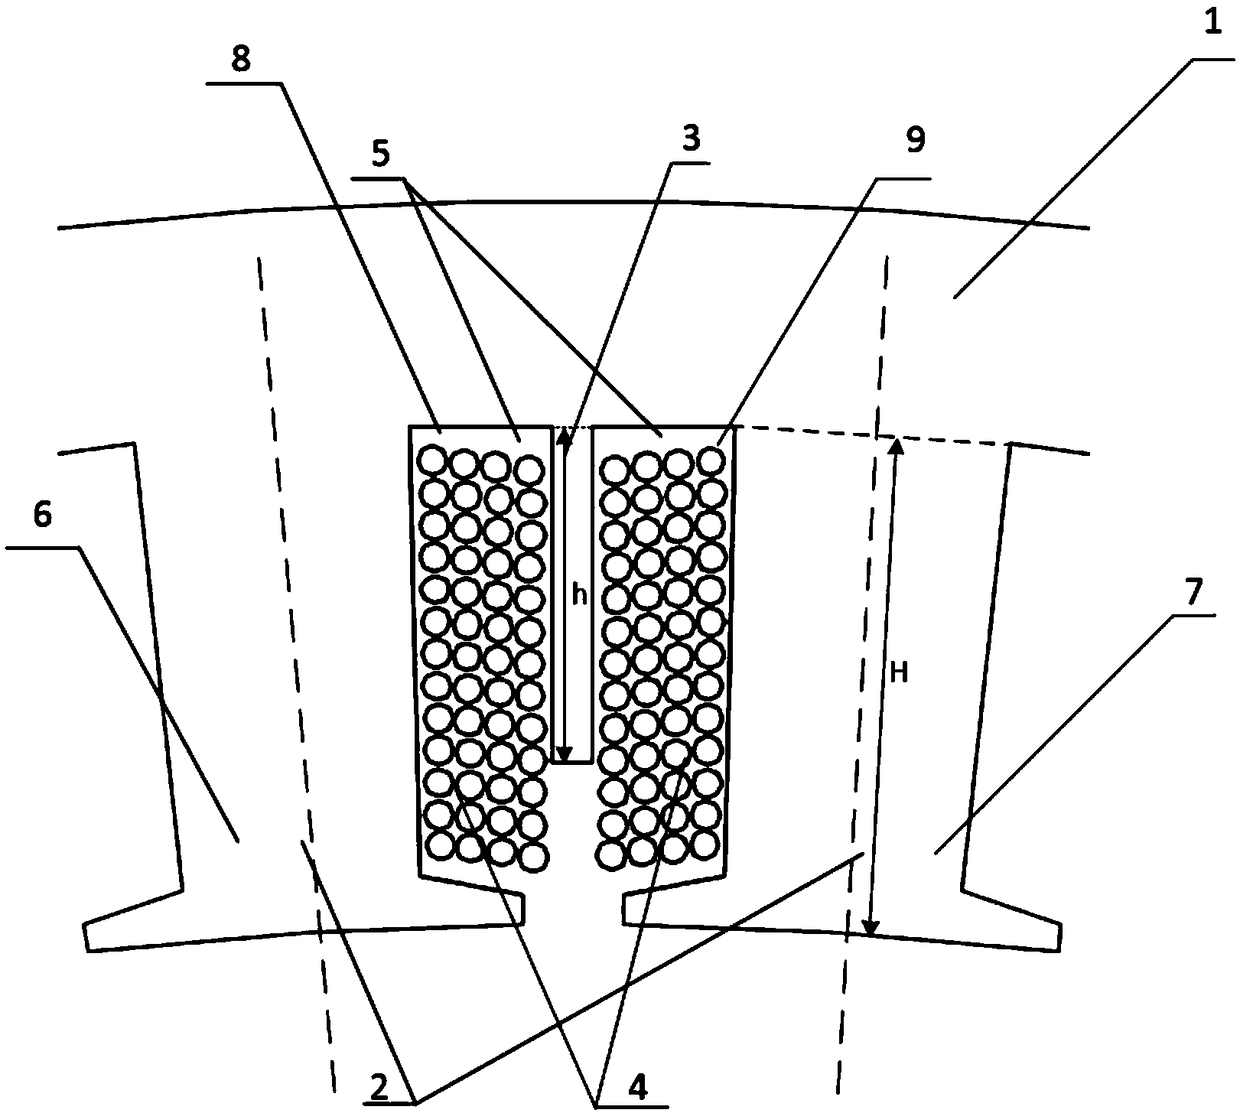 Motor stator structure with auxiliary cooling teeth, and motor